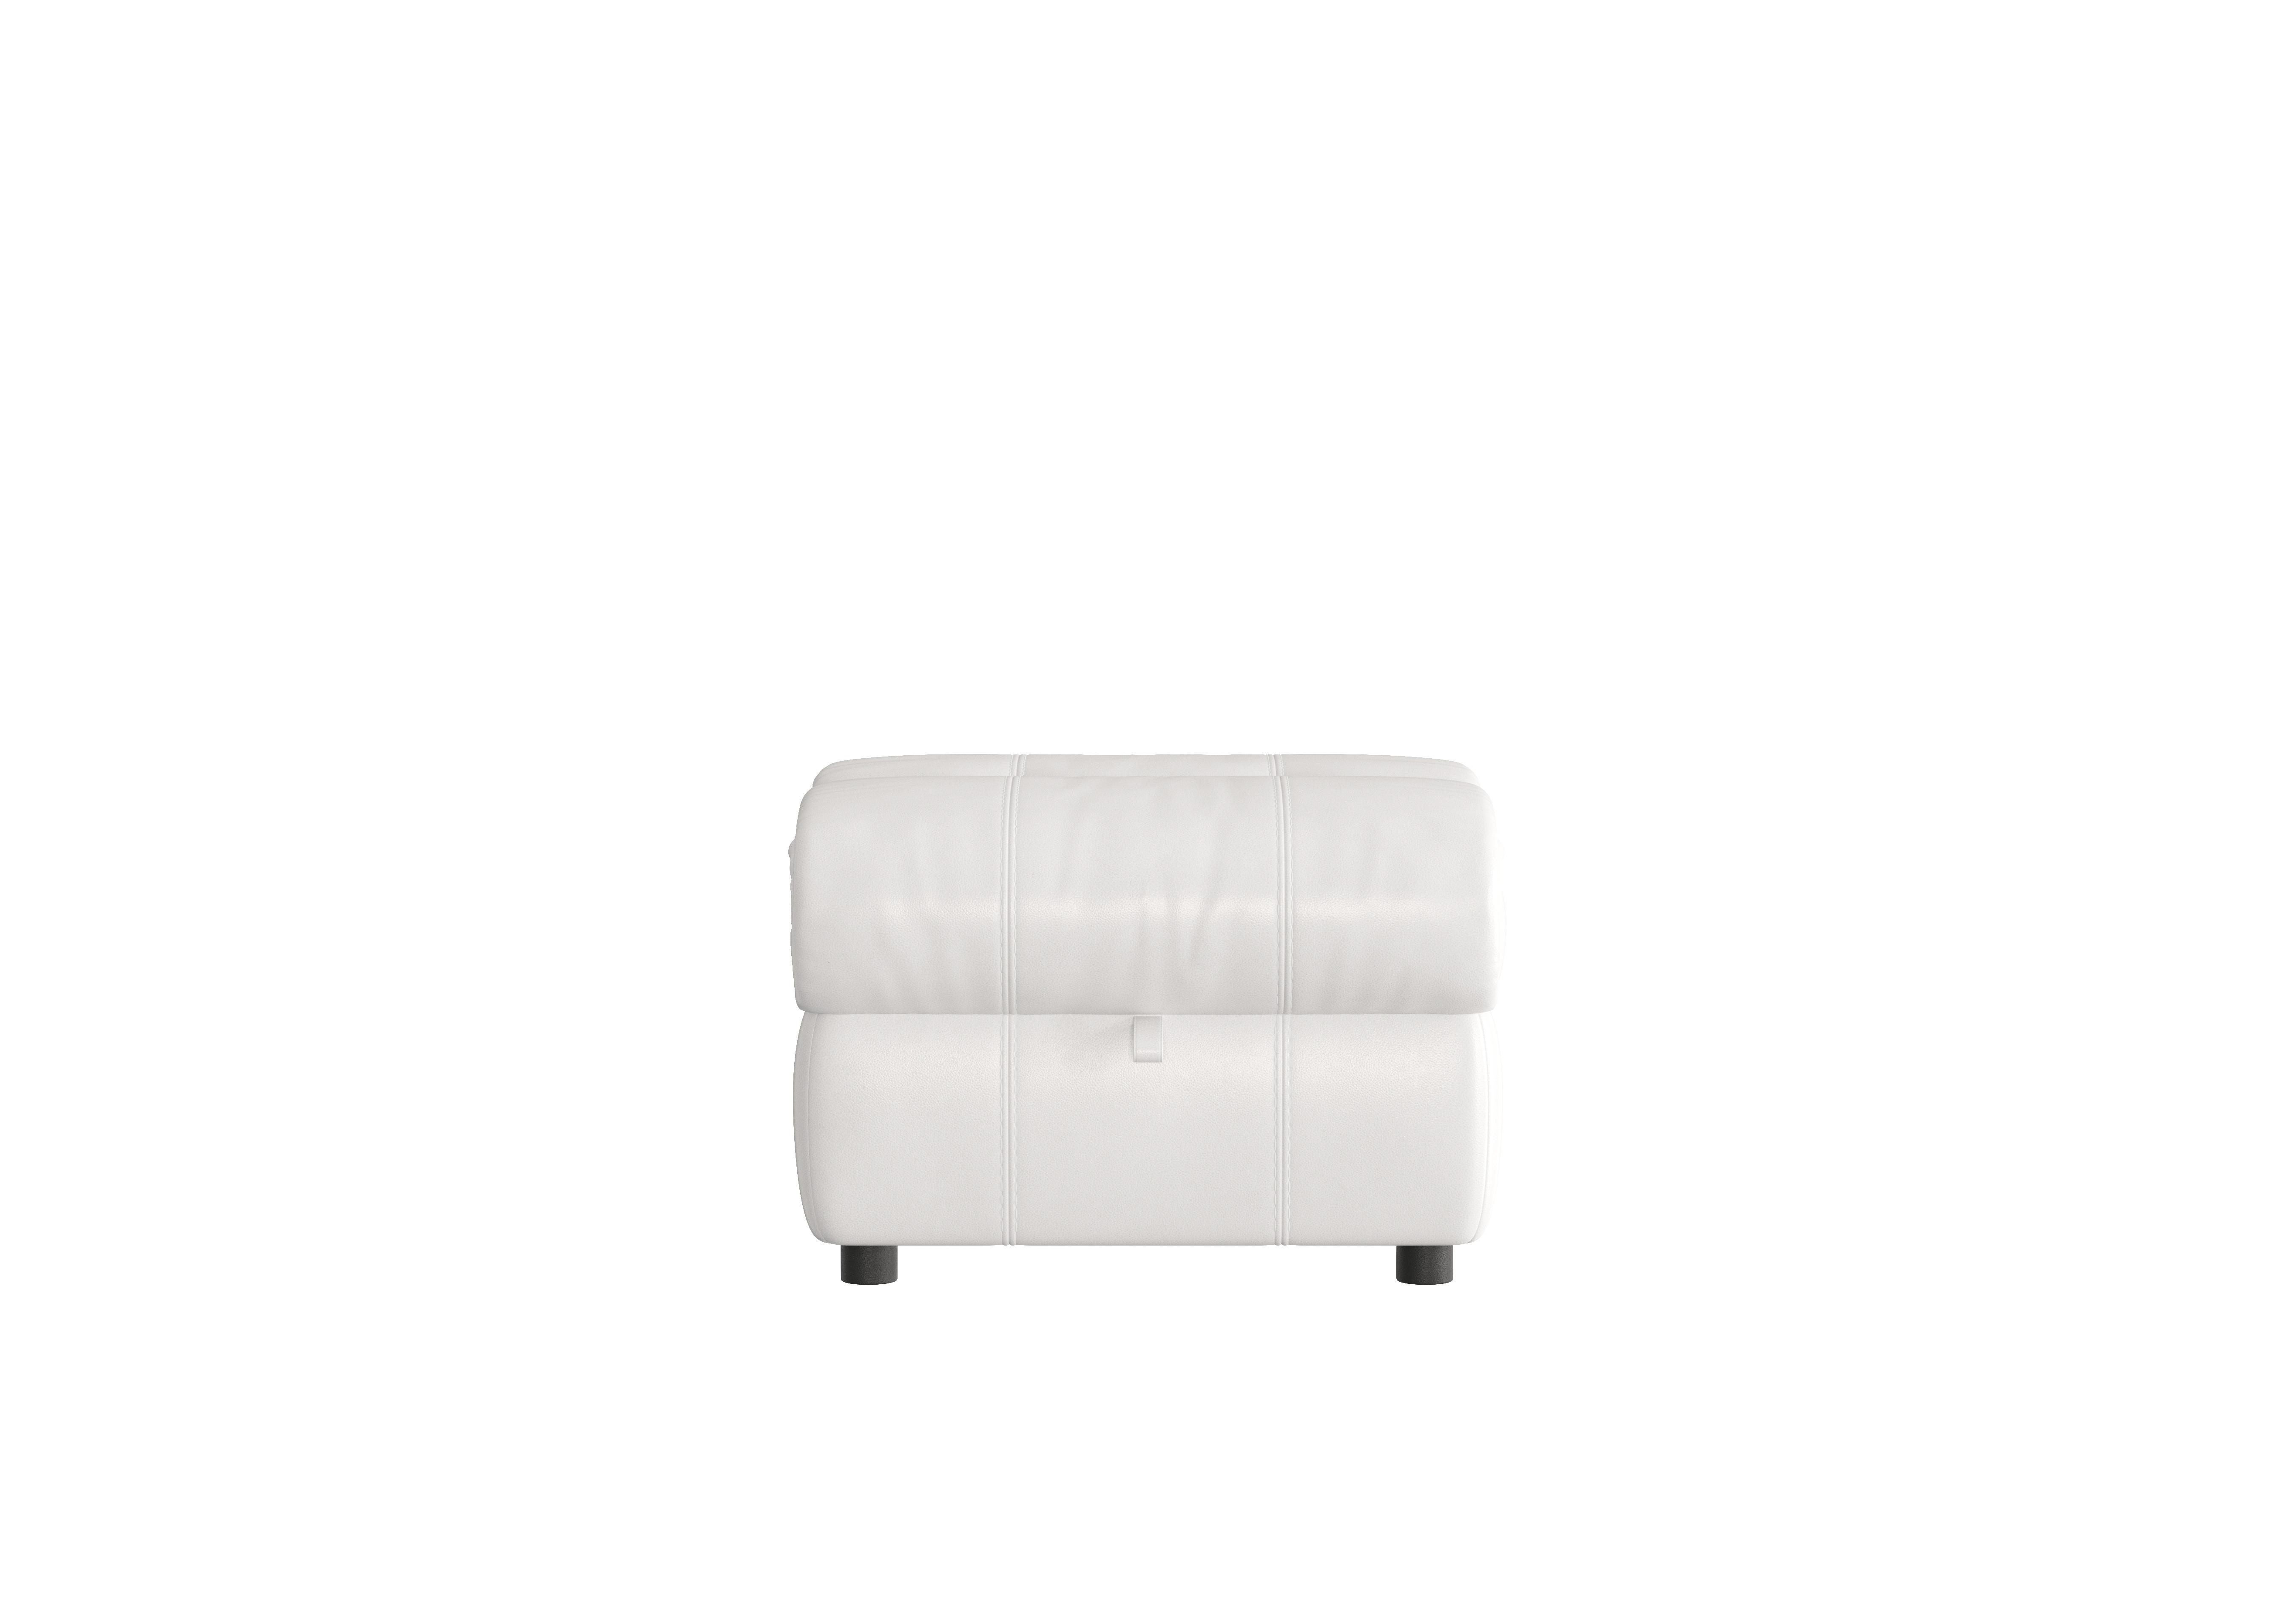 Link Leather Footstool in Bv-744d Star White on Furniture Village